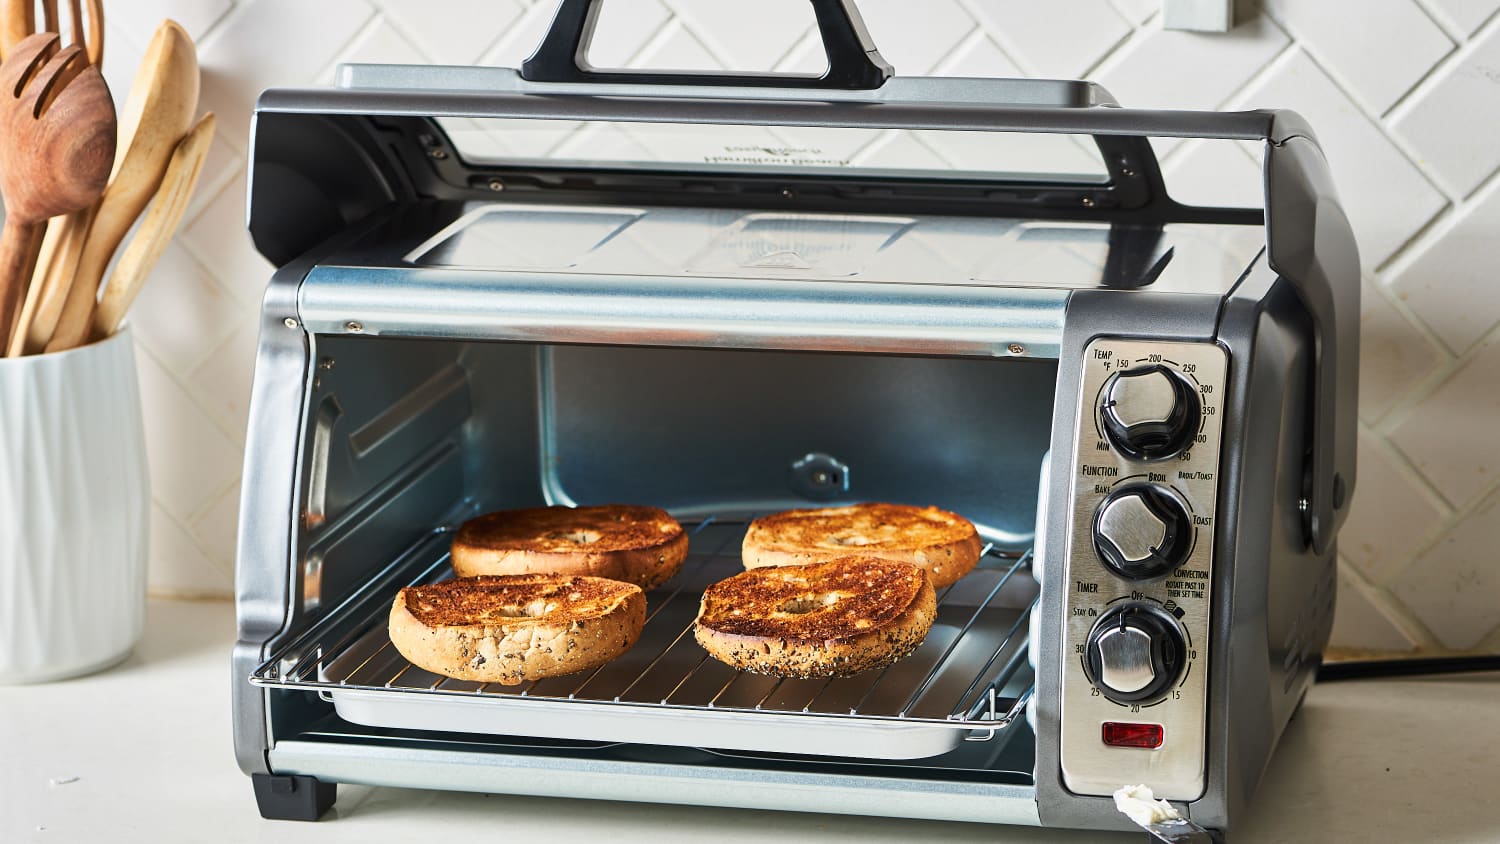 What is the best toaster oven under $100? - Quora